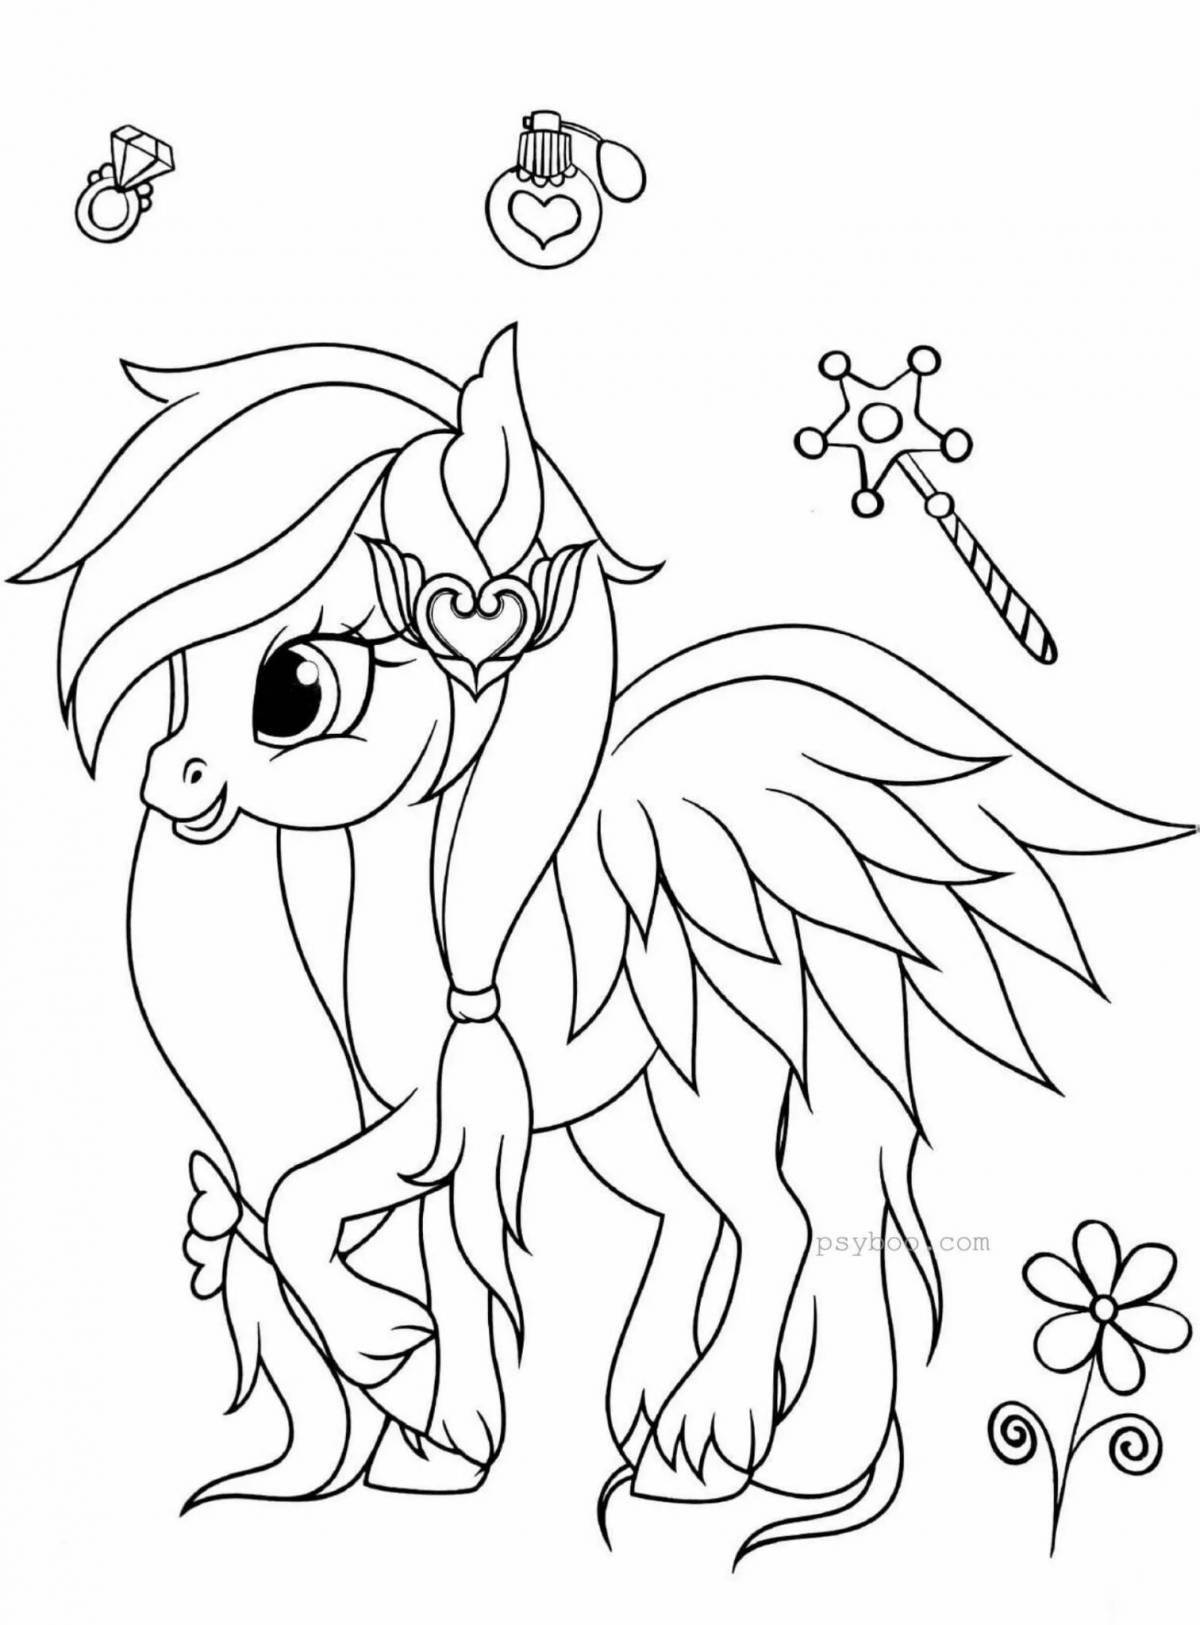 Gorgeous unicorn pony coloring book for girls